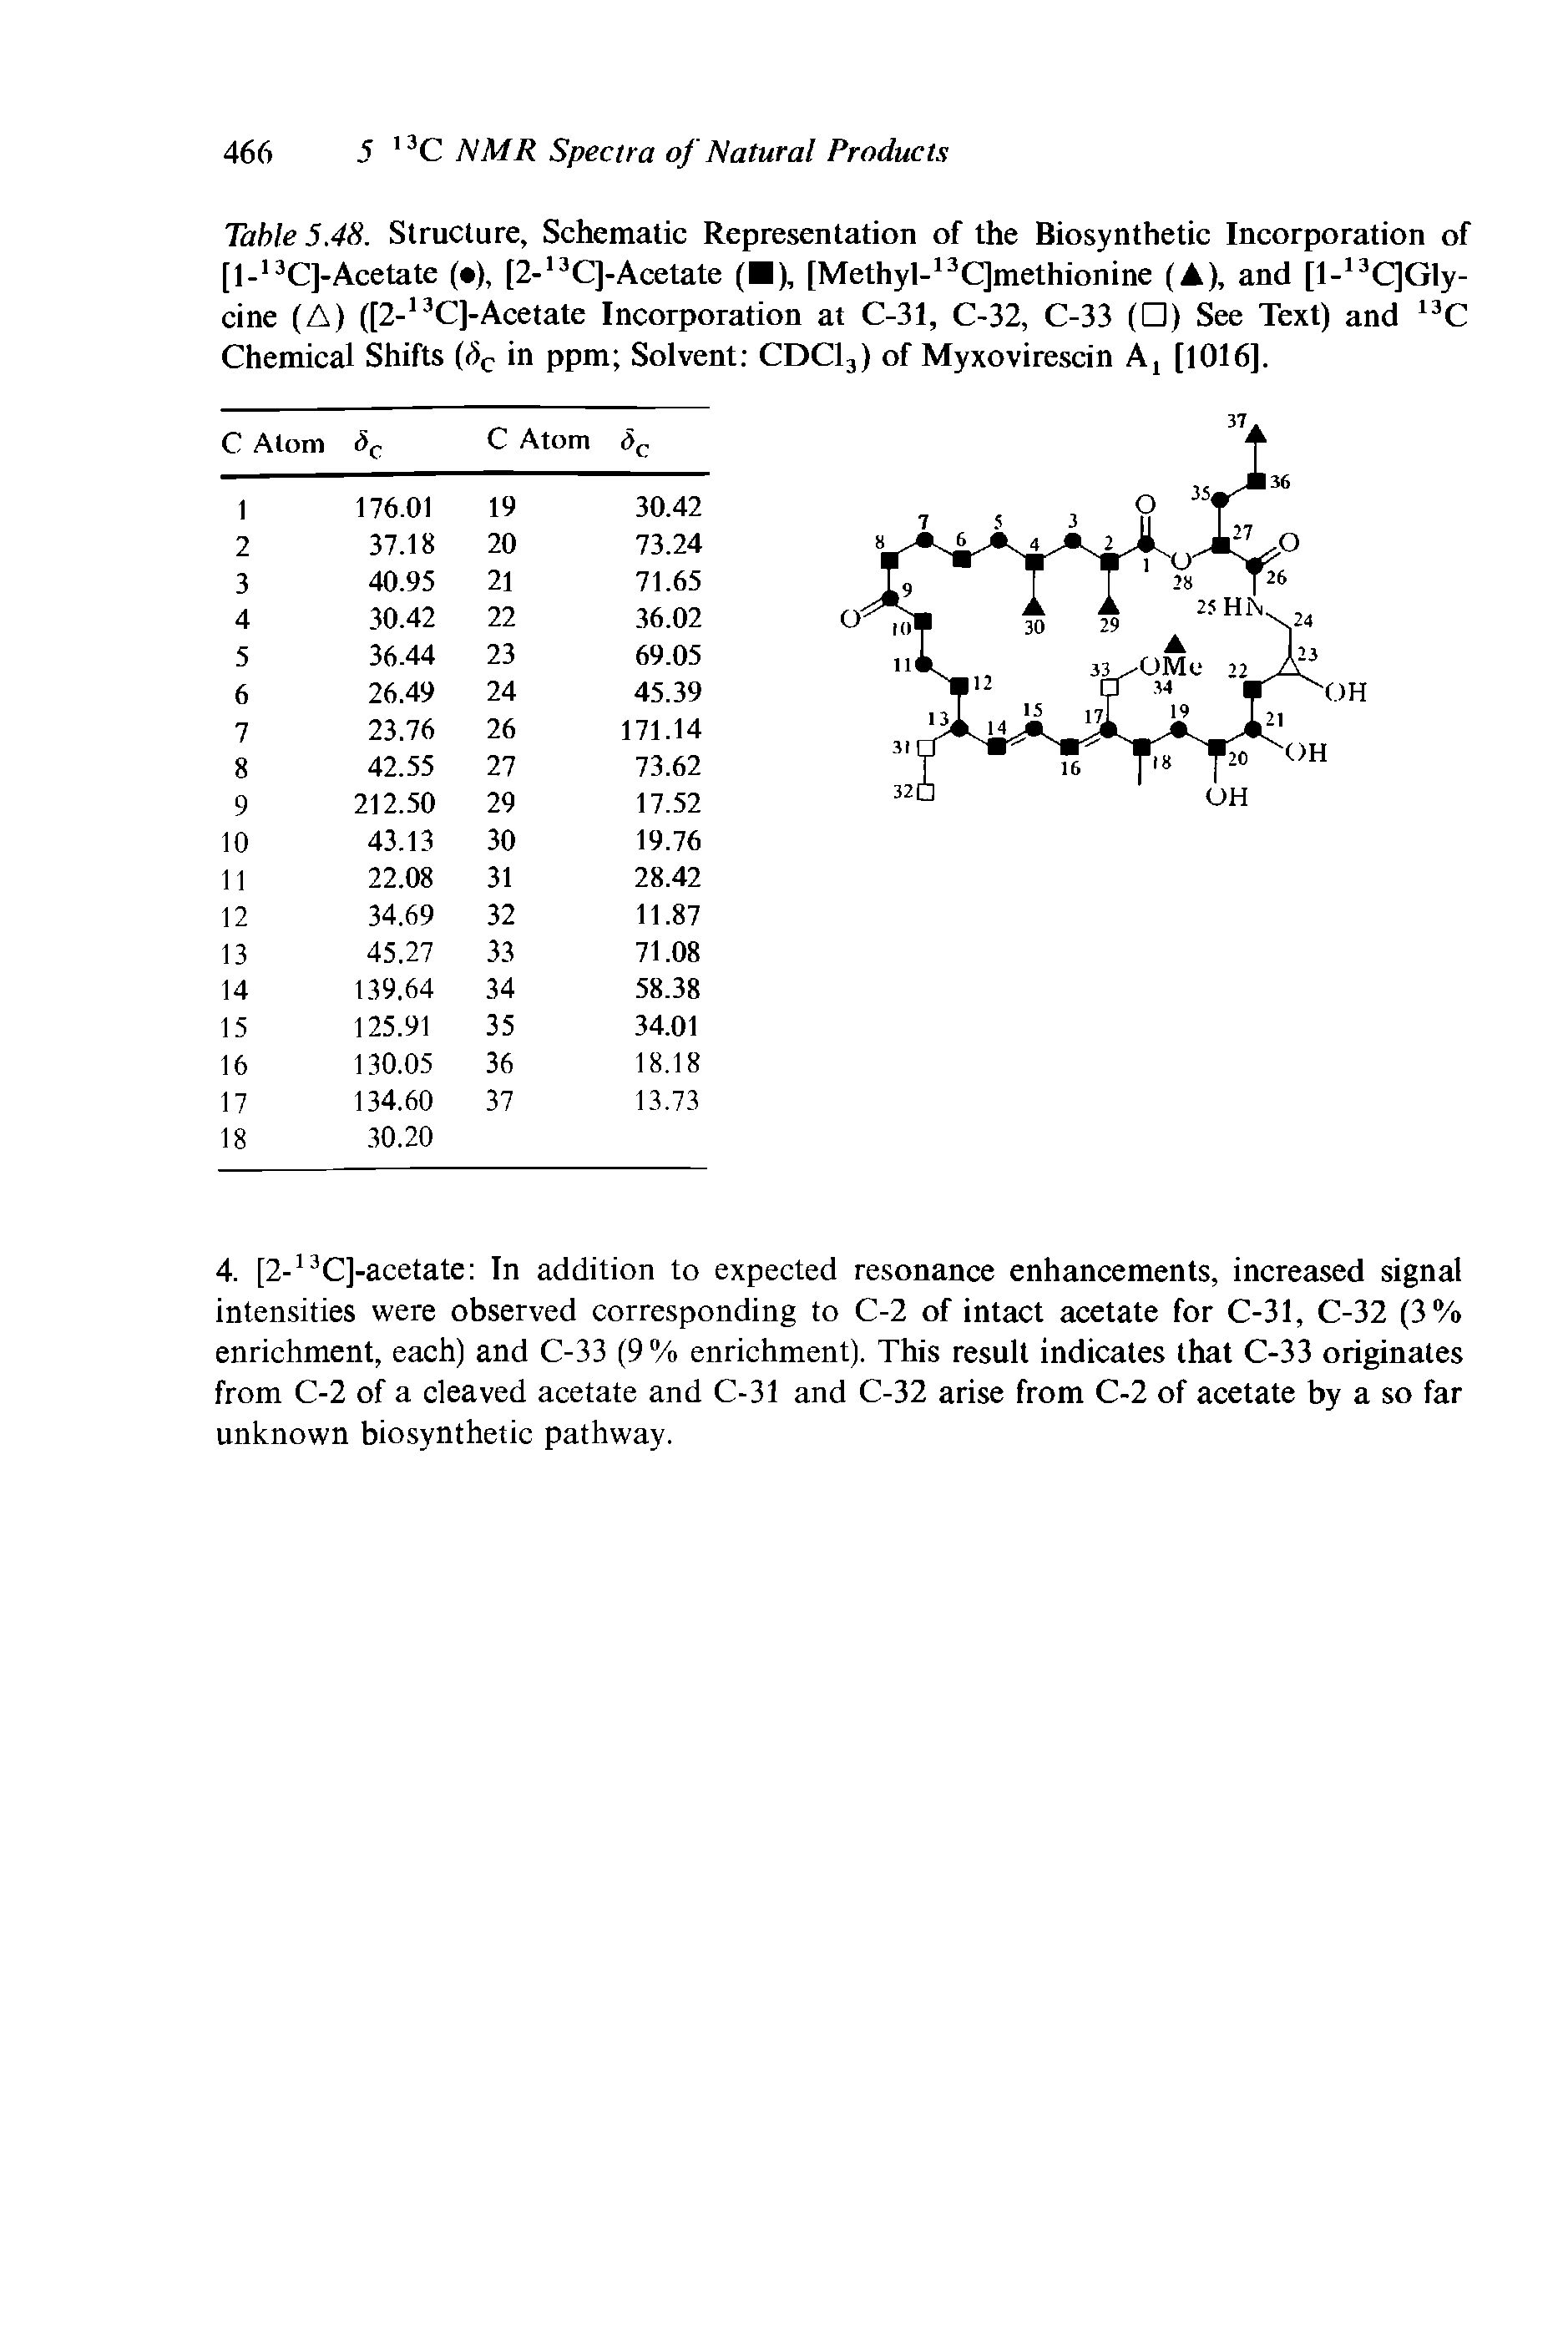 Table 5.48. Structure, Schematic Representation of the Biosynthetic Incorporation of [l-13C]-Acetate ( ), [2-13C]-Acetate ( ), [Methyl-,3C]methionine (A), and [l-13C]Gly-cine (A) ([2-I3C]-Acetate Incorporation at C-31, C-32, C-33 ( ) See Text) and 13C Chemical Shifts (r)c in ppm Solvent CDC13) of Myxovirescin At [1016],...